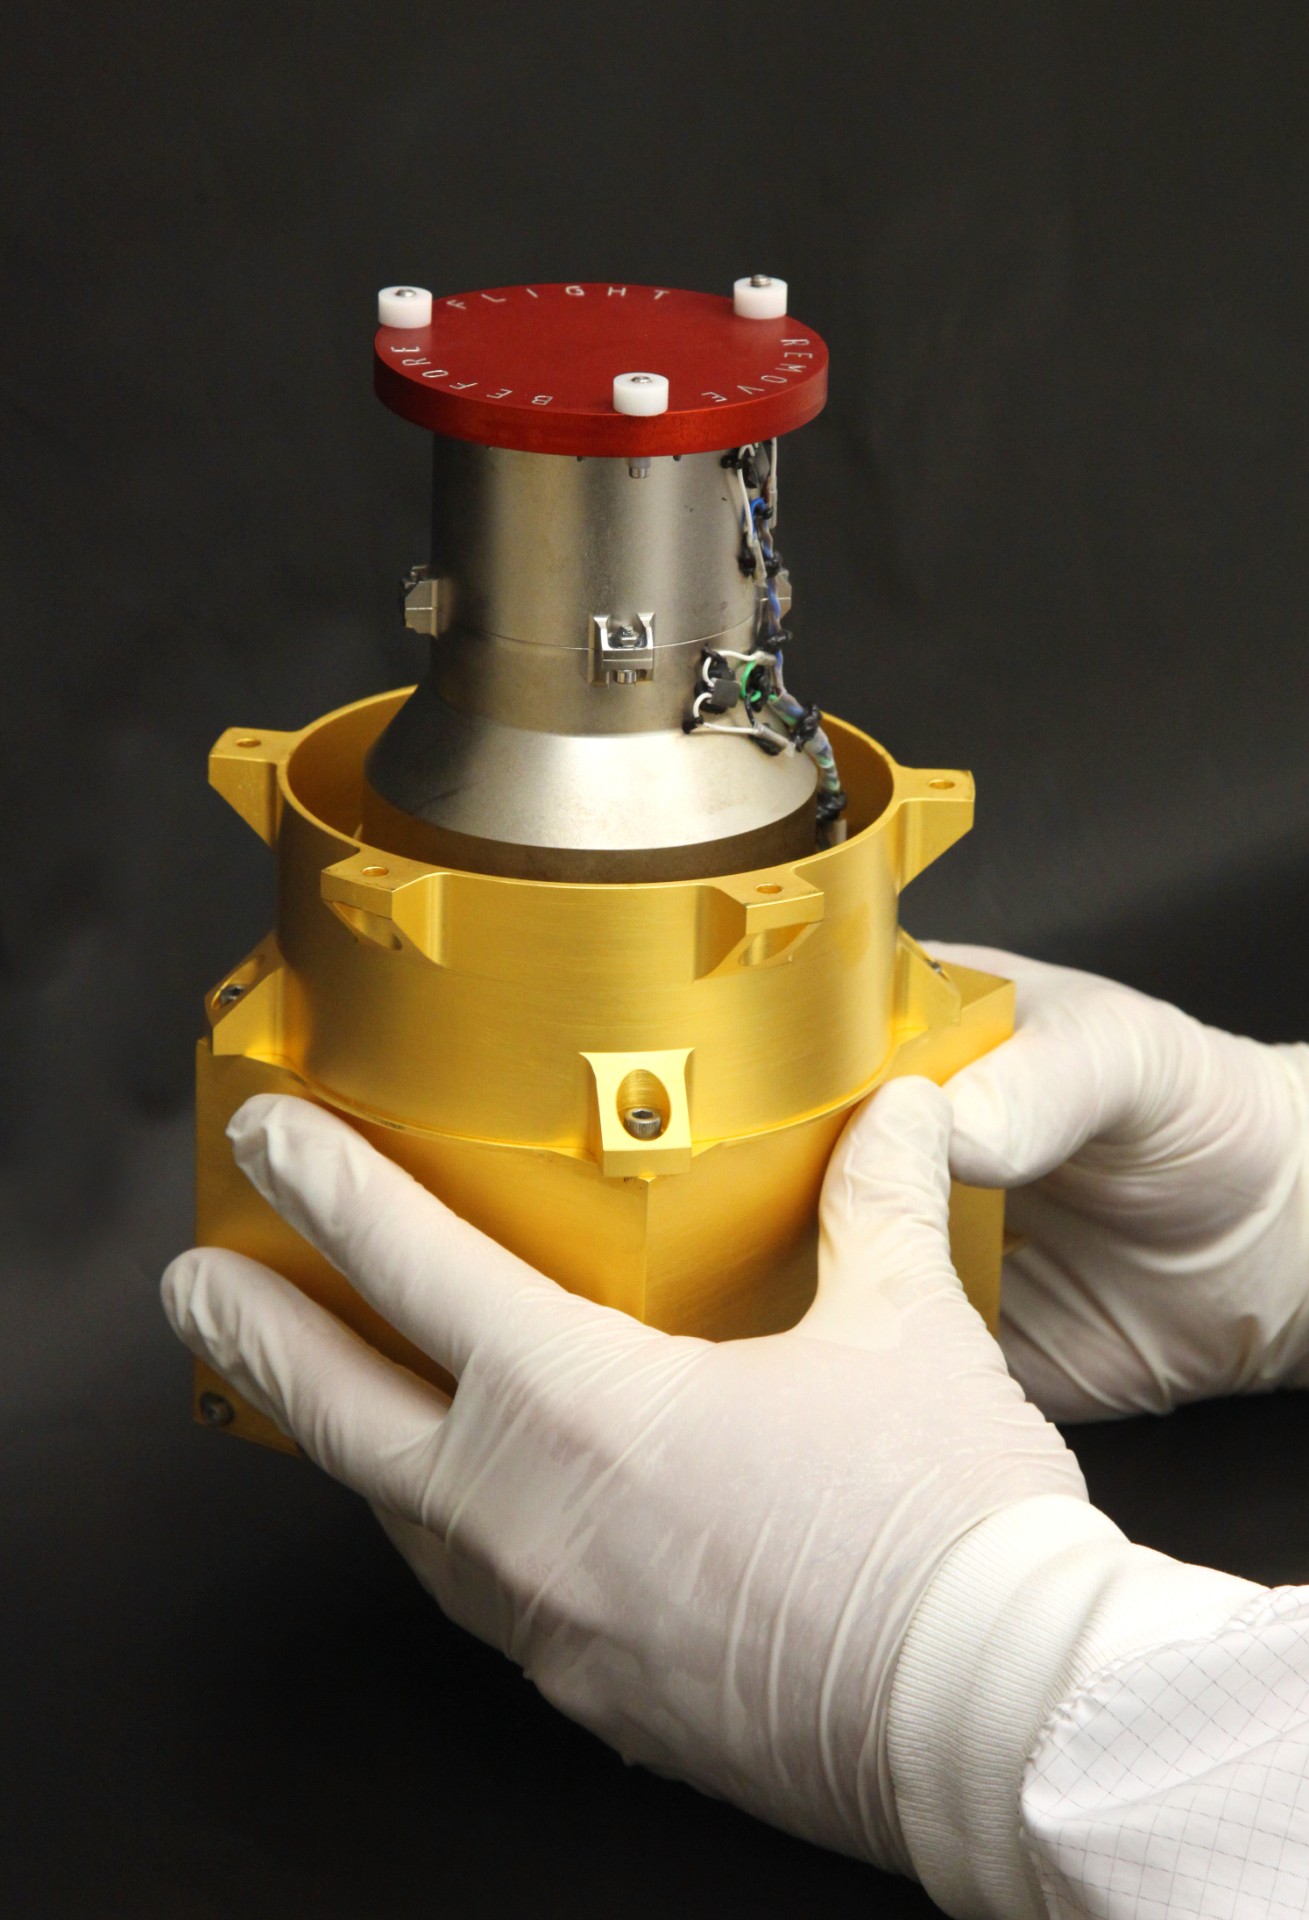 A person wearing white gloves holds a metallic device with a red cap and yellow casing